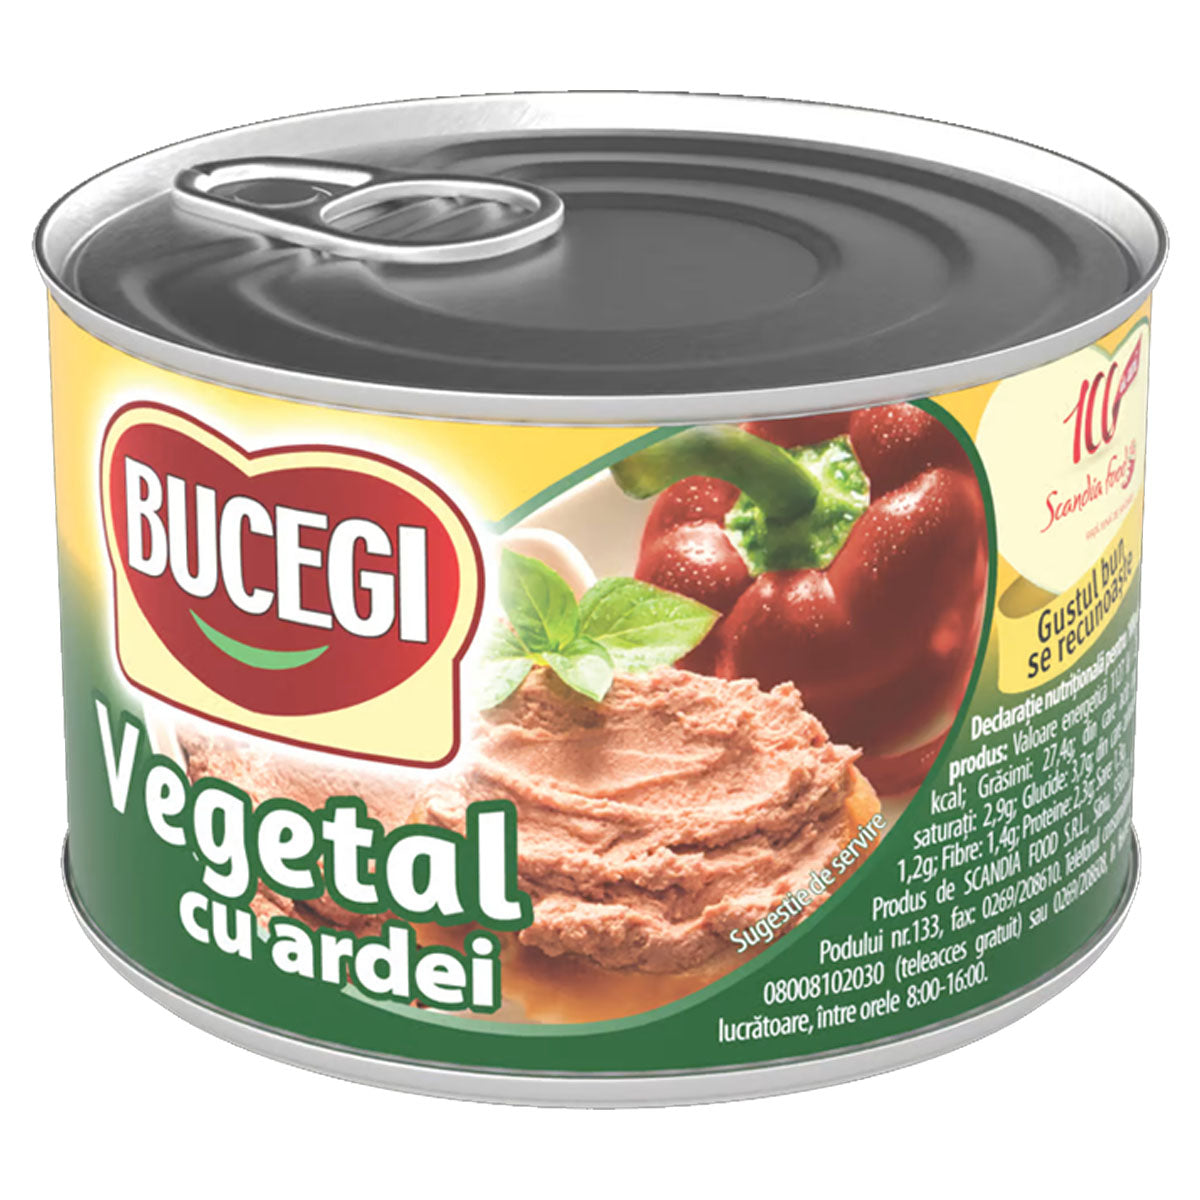 Bucegi - Vegetable Pate with Paprika Peppers (Vegetal Ardei) - 200g - Continental Food Store